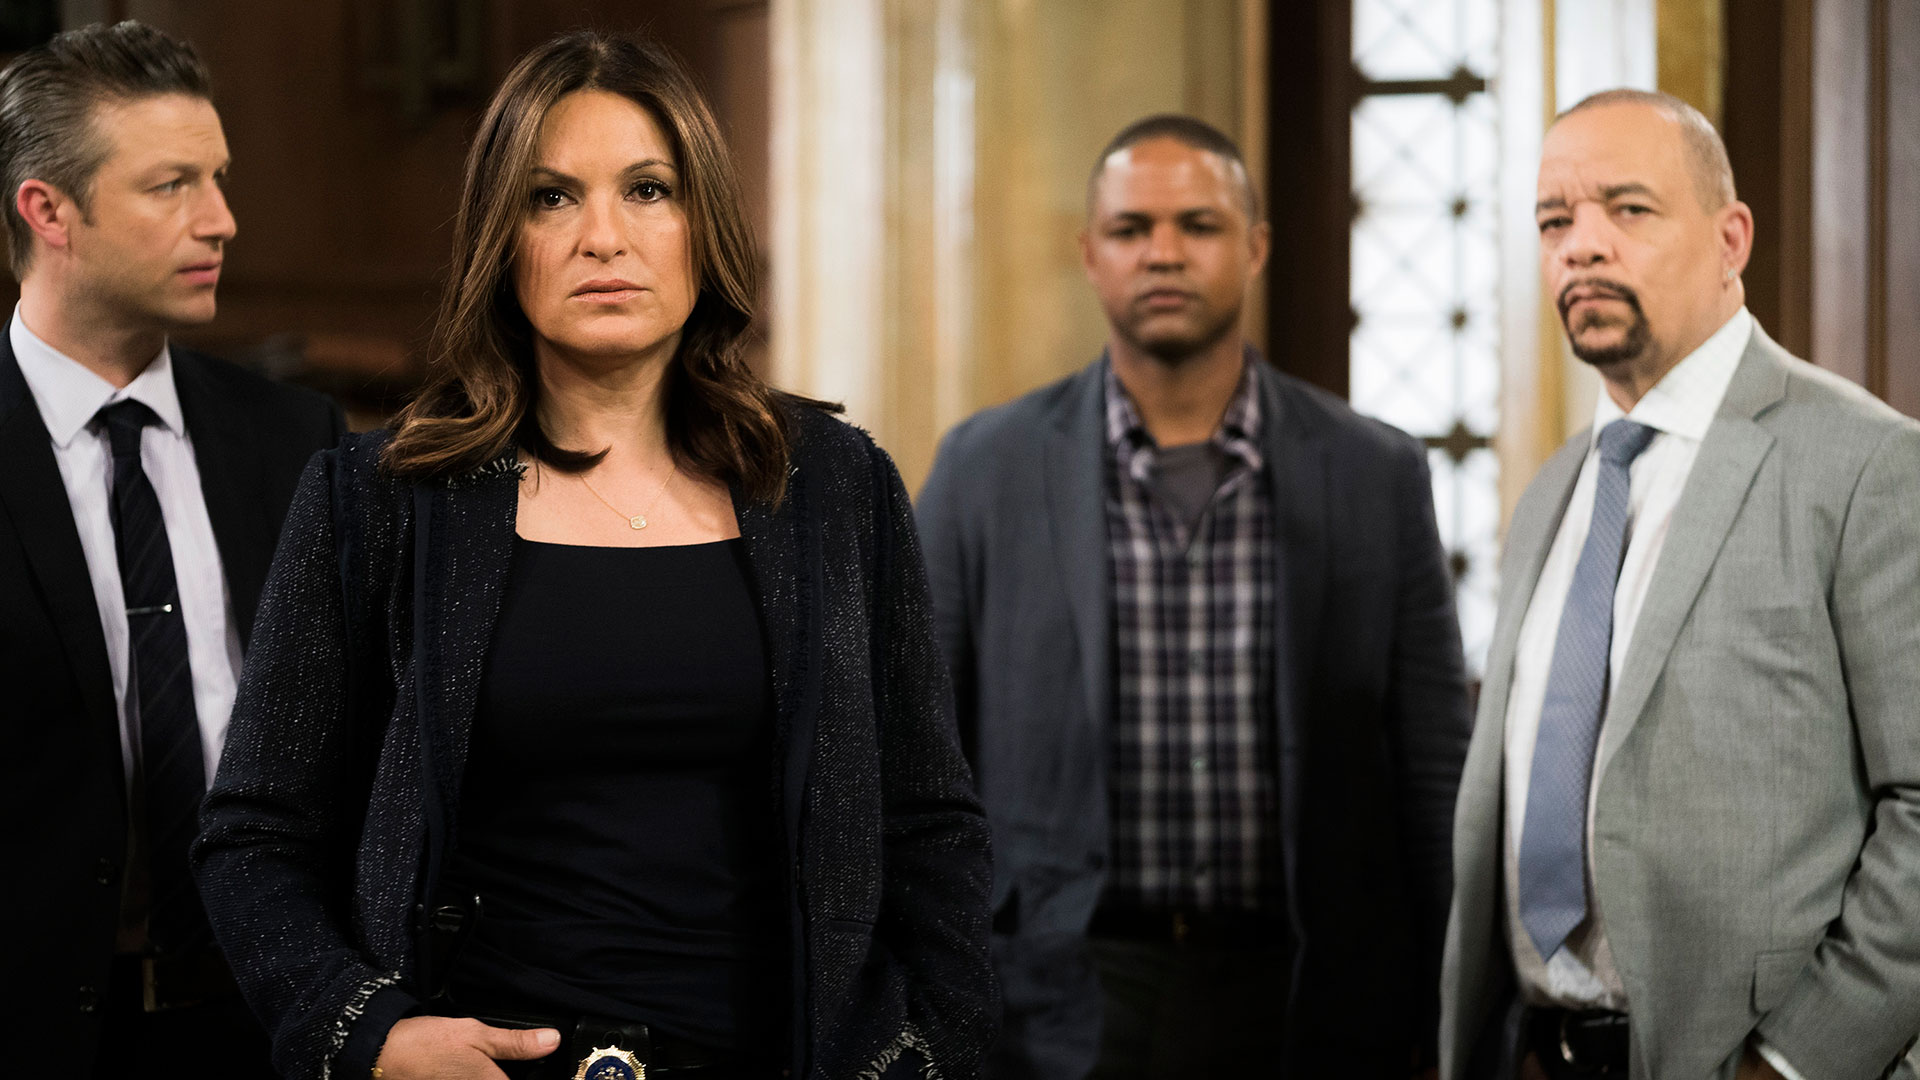 Watch Intersecting Lives (Season 17, Episode 21) of Law & Order: Sp...